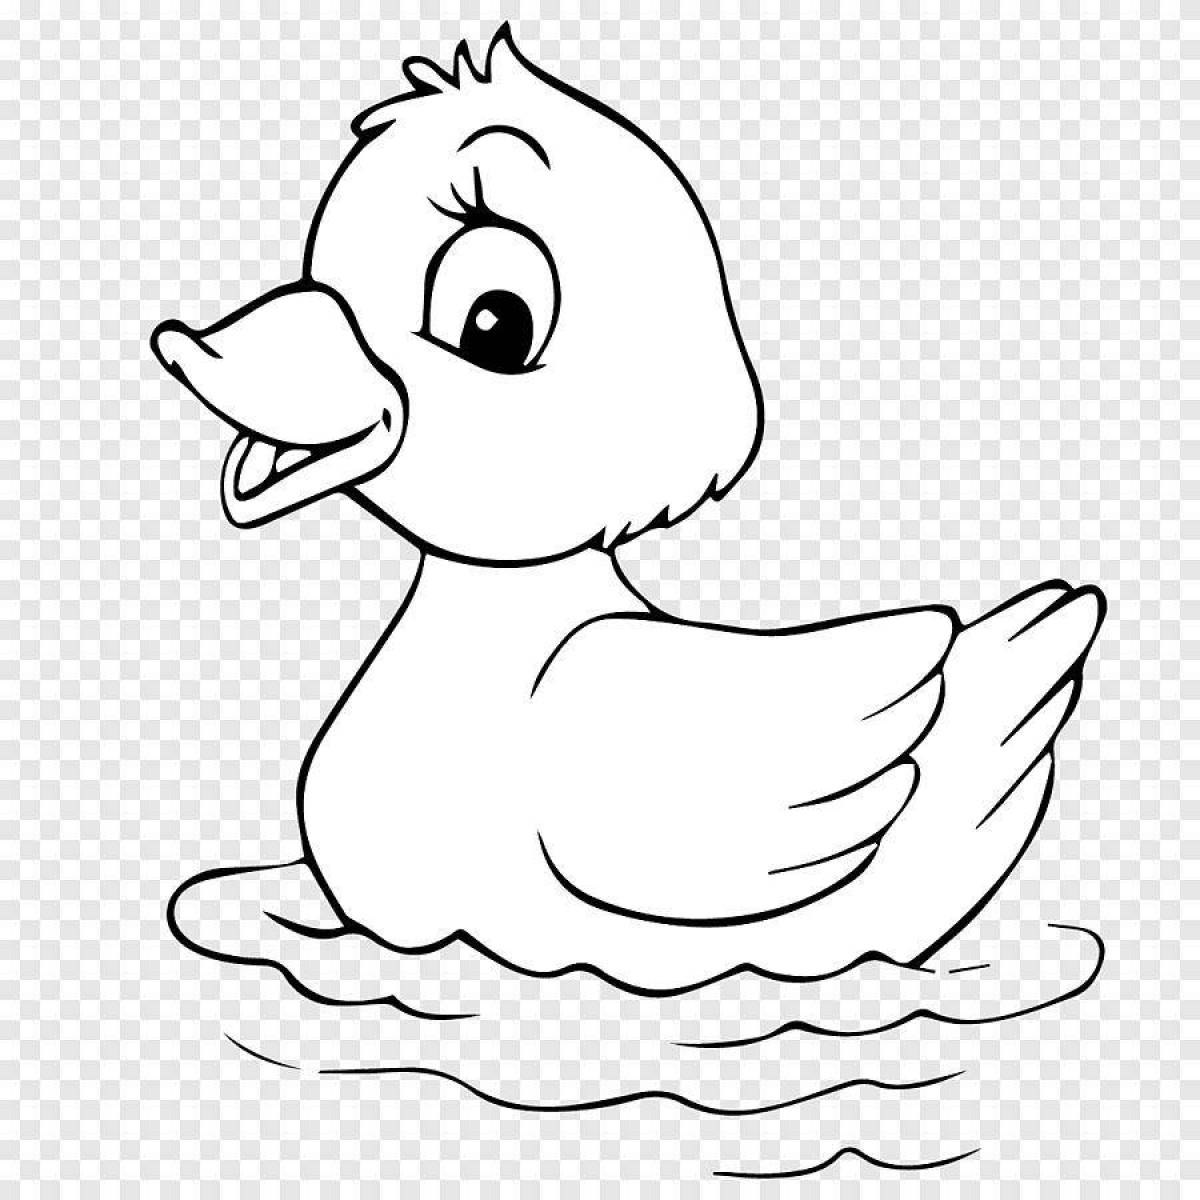 Coloring book witty rubber duck